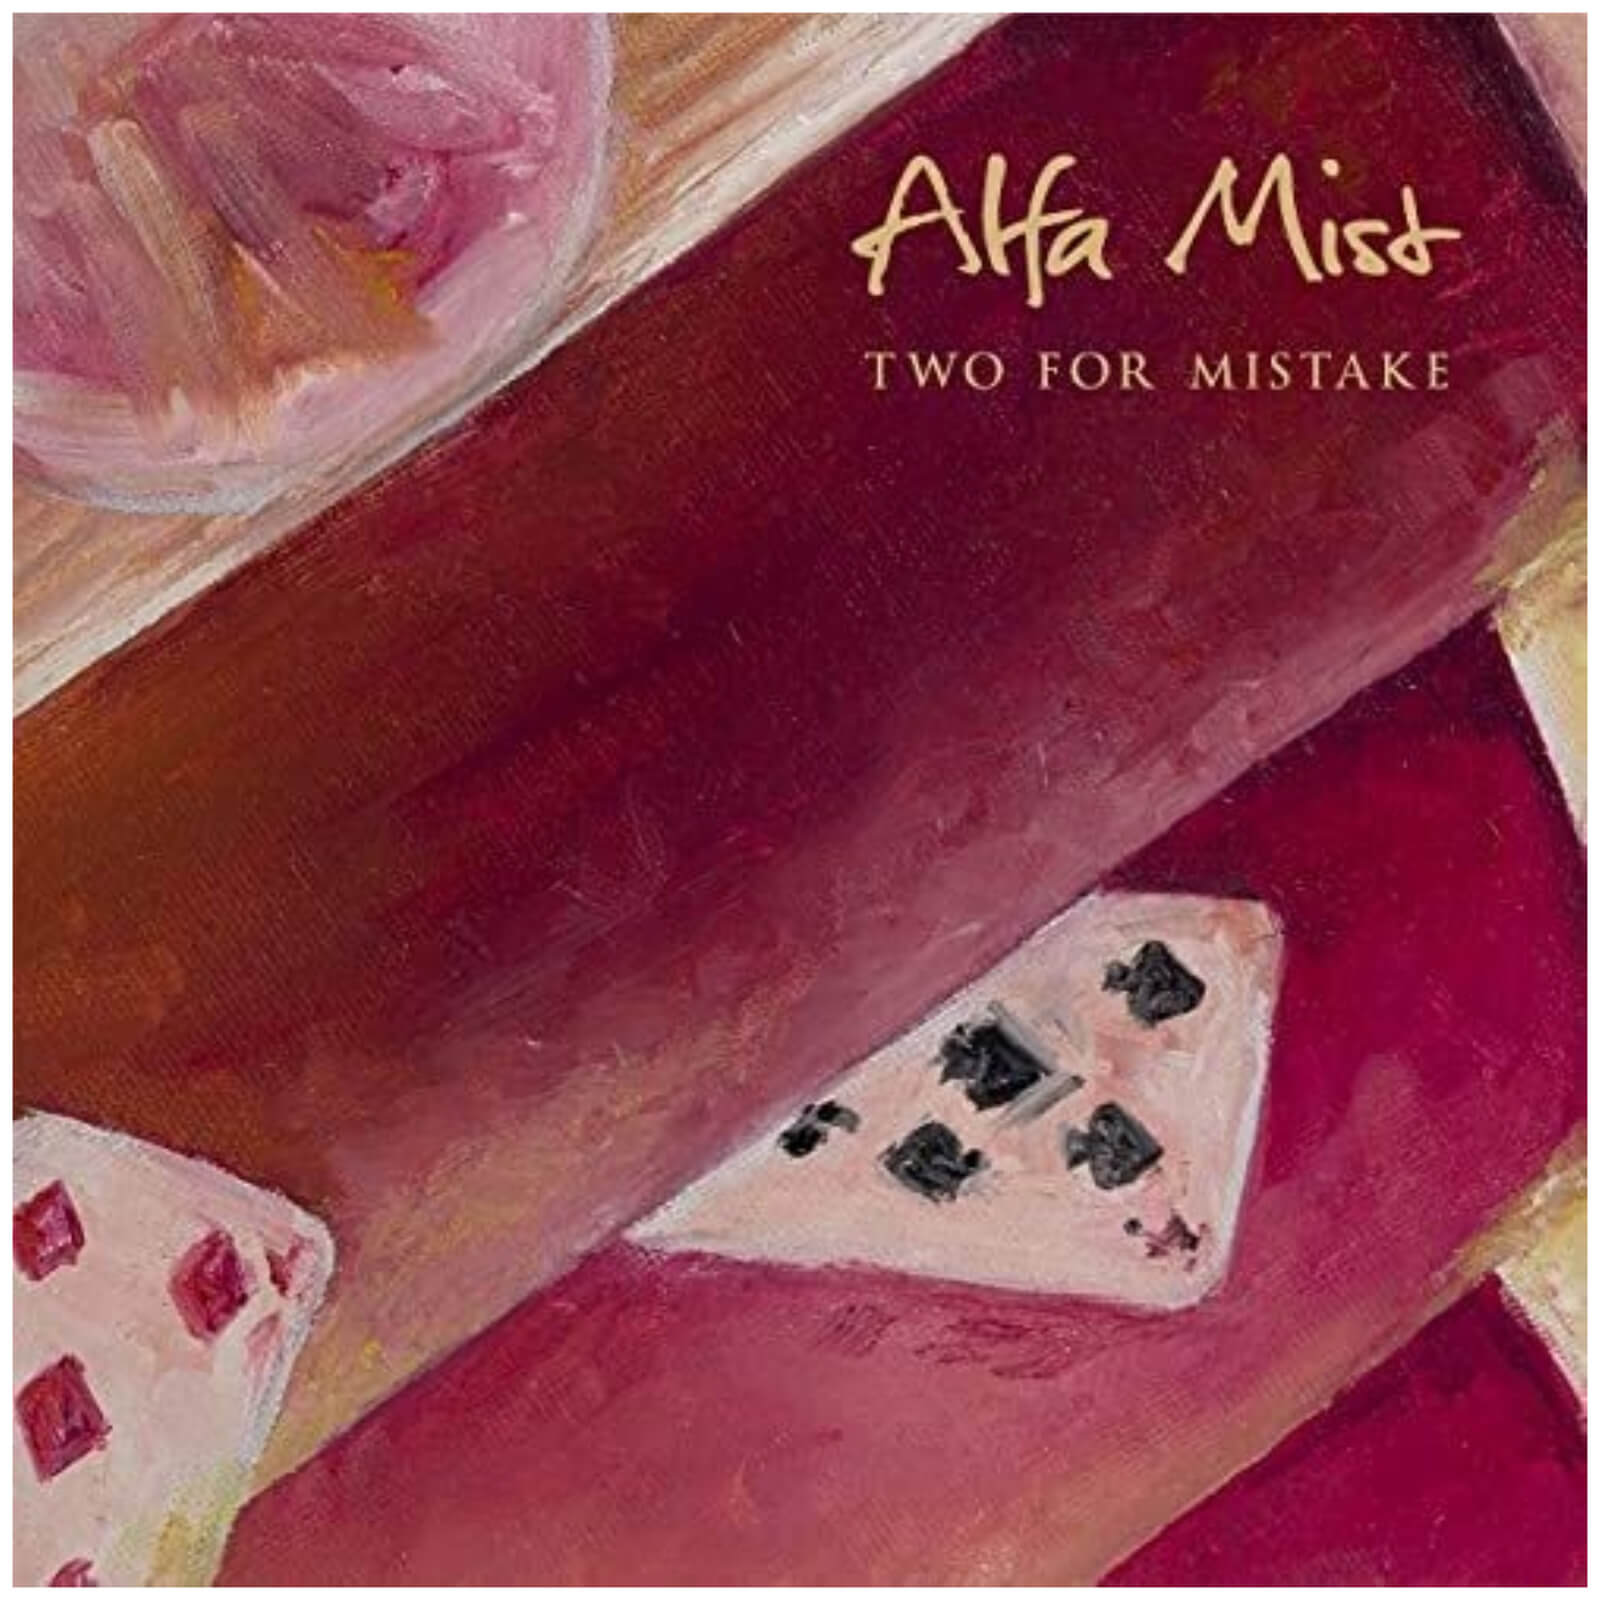 Alfa Mist - Two For Mistake 10